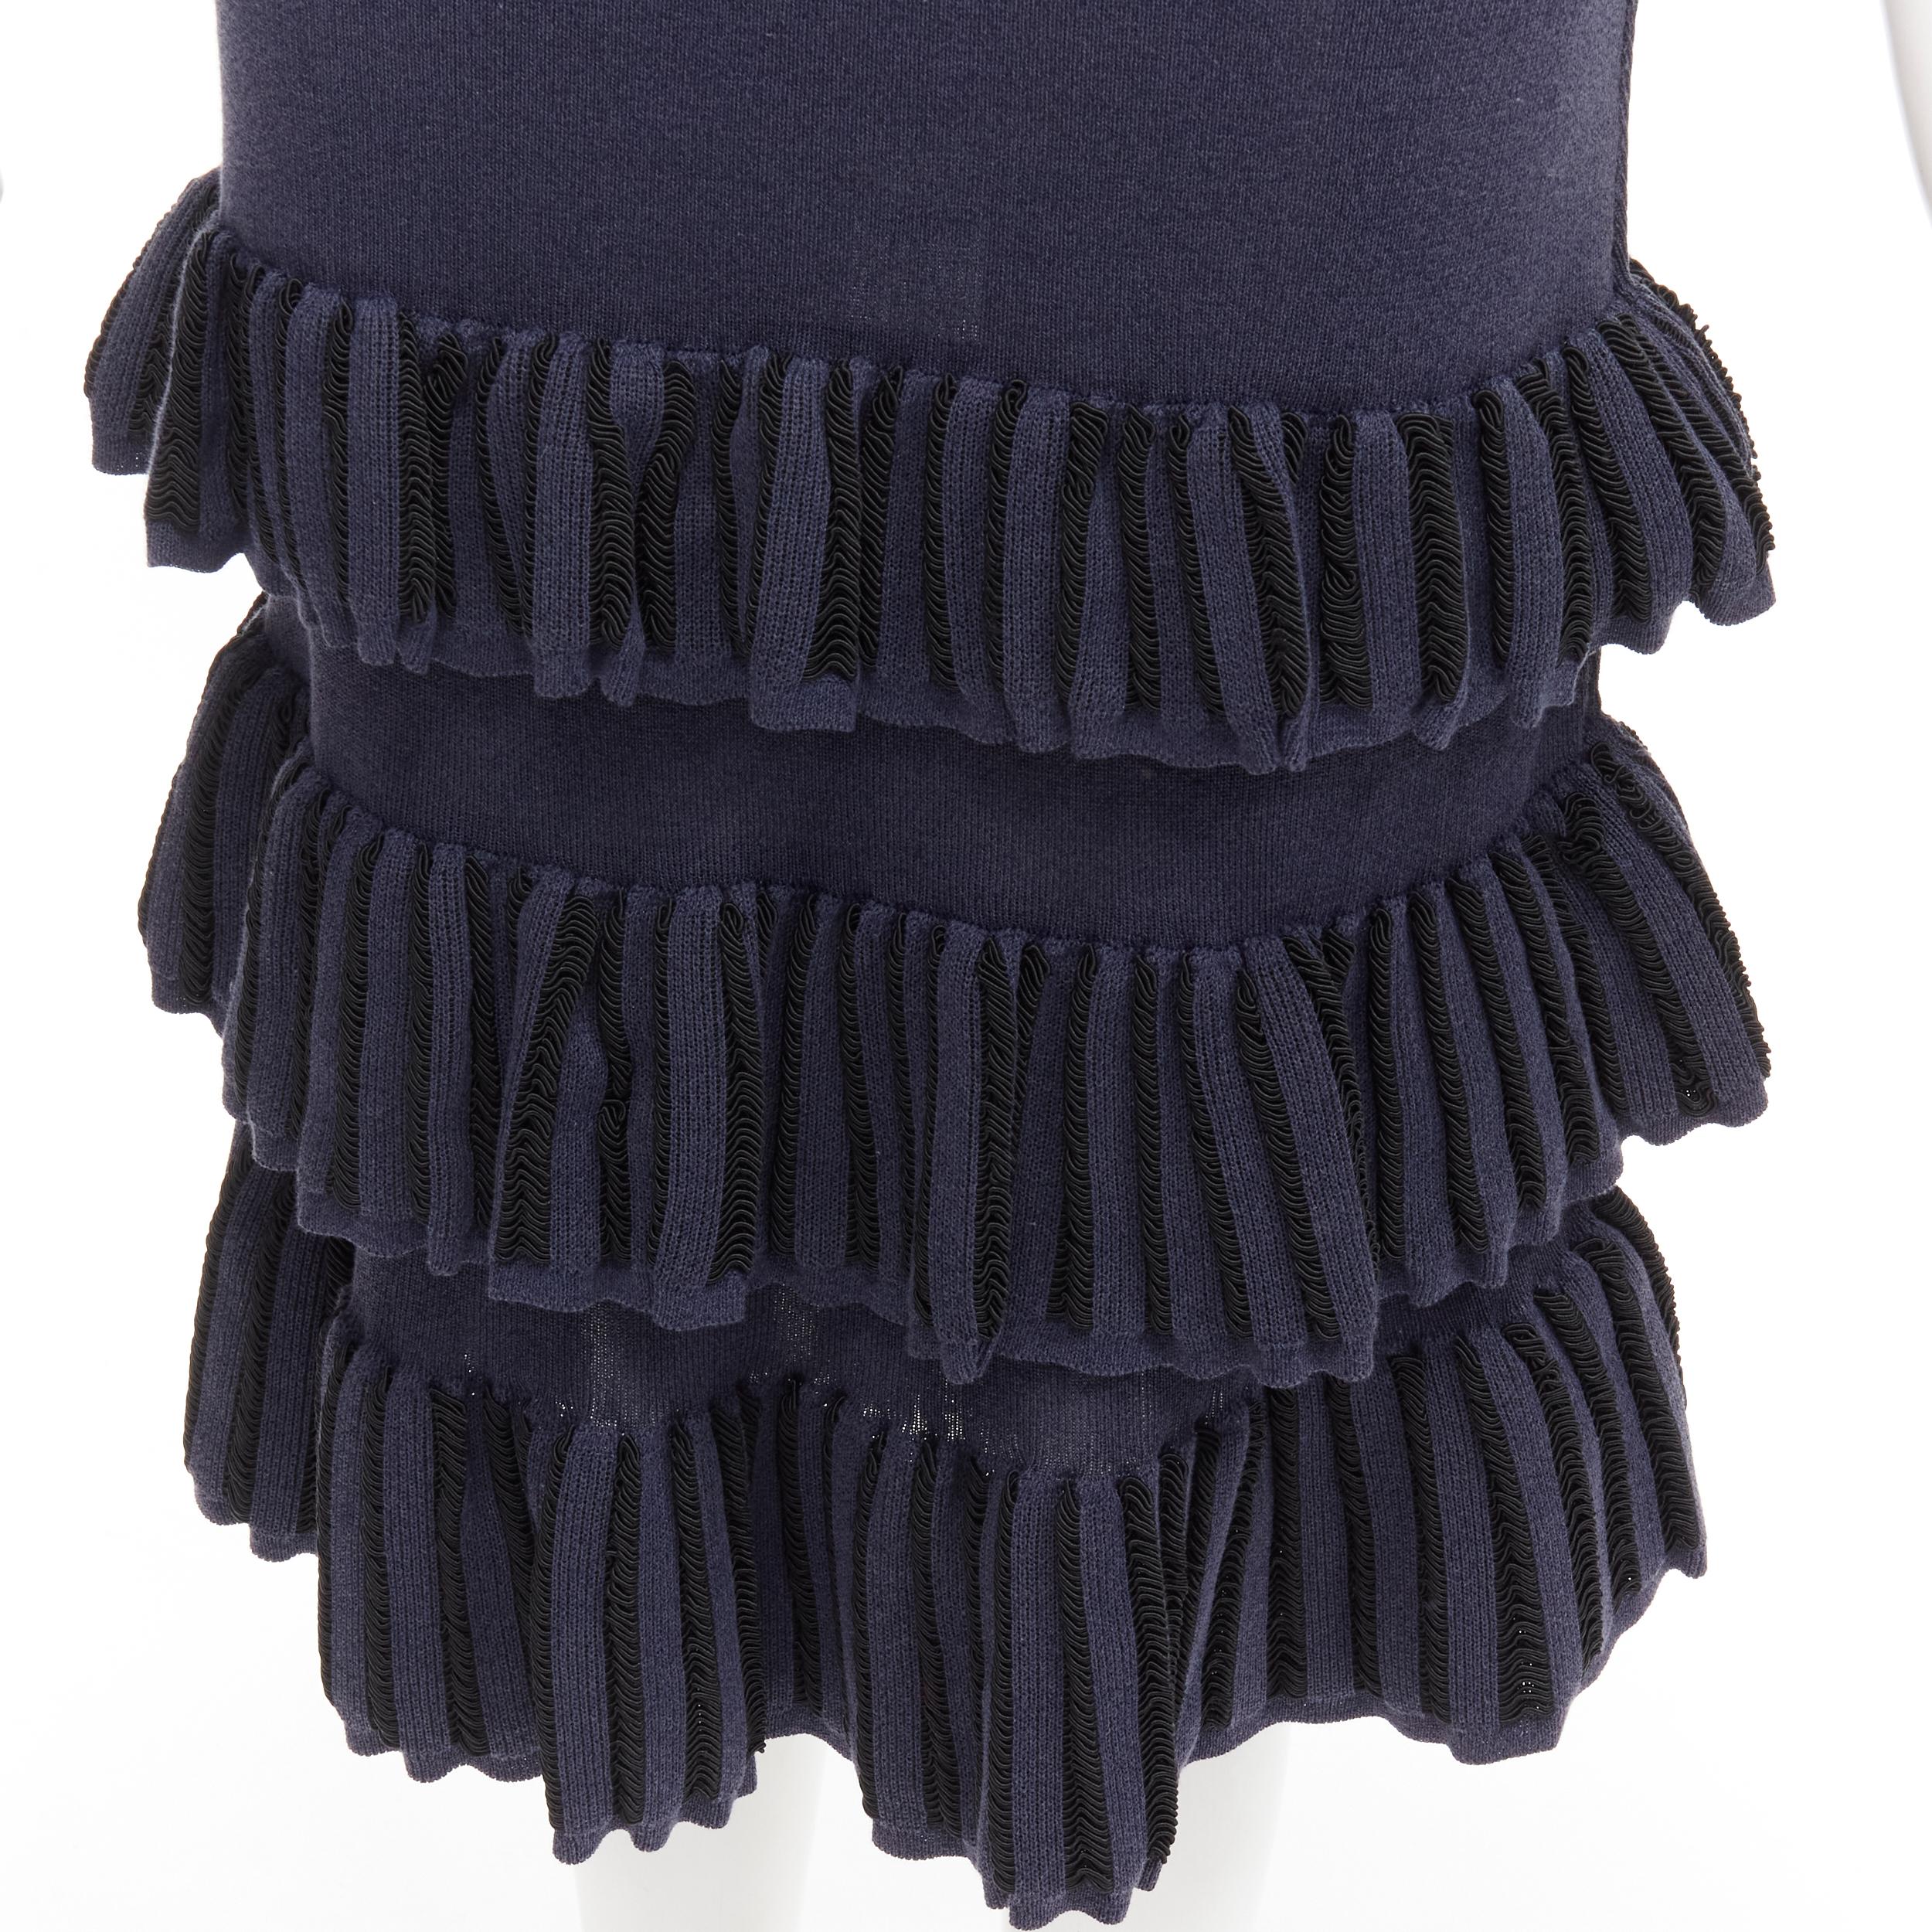 AZZEDINE ALAIA Vintage 1980's navy knitted tiered ruffles plunge neck dress
Reference: TGAS/C01665
Brand: Alaia
Designer: Azzedine Alaia
Collection: 1980s
Material: Feels like cotton
Color: Navy
Pattern: Solid
Closure: Pullover
Extra Details: Loop